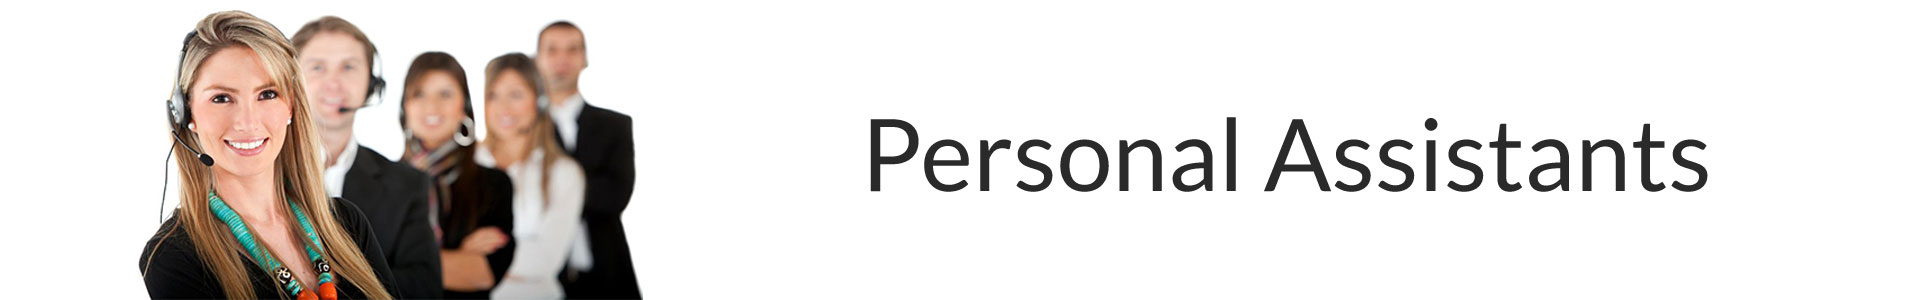 Personal Assistant Services